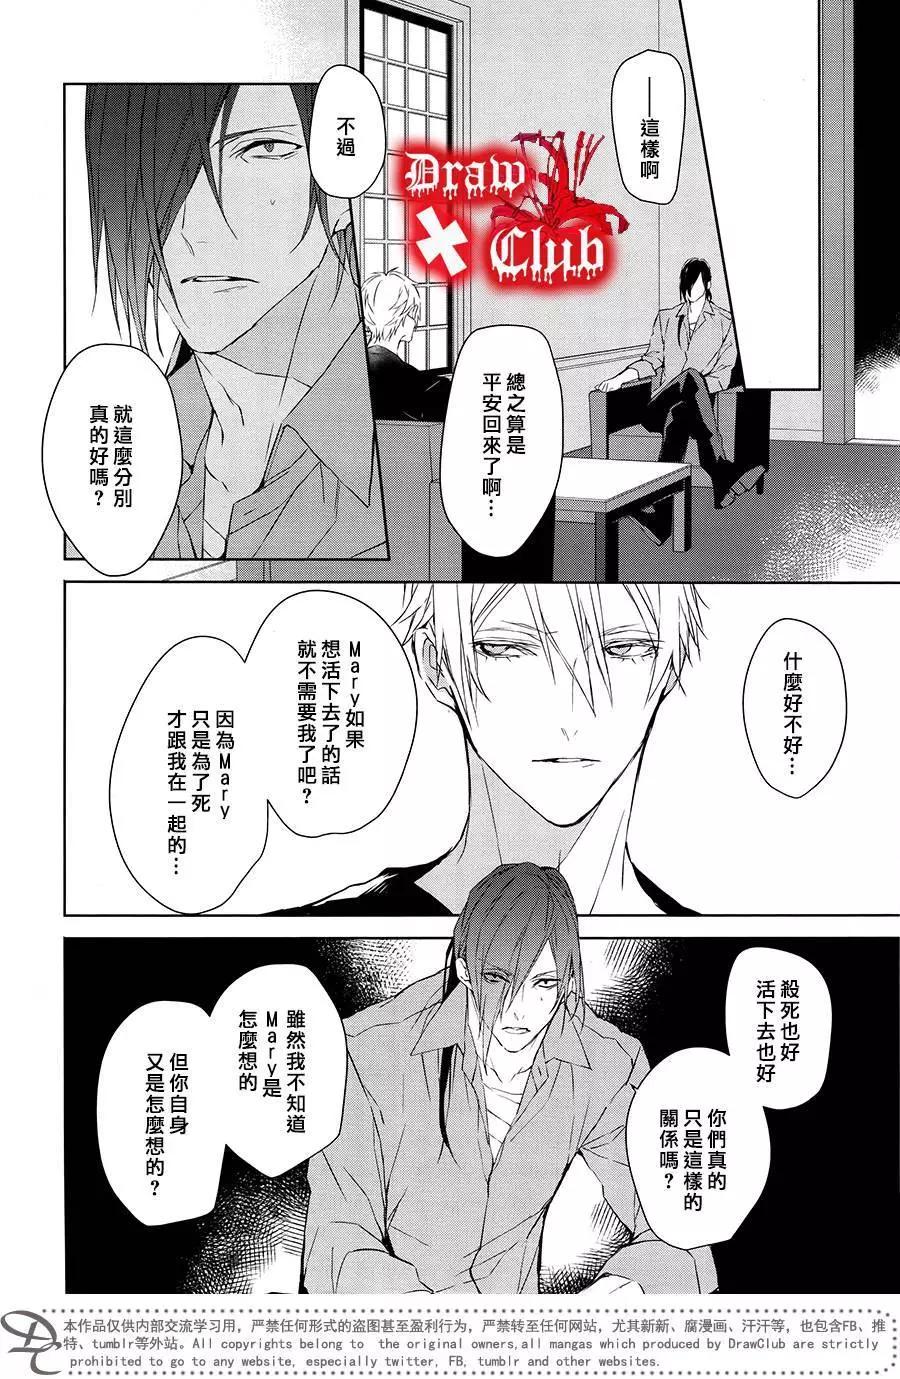 Bloody Mary - 第37回 - 6